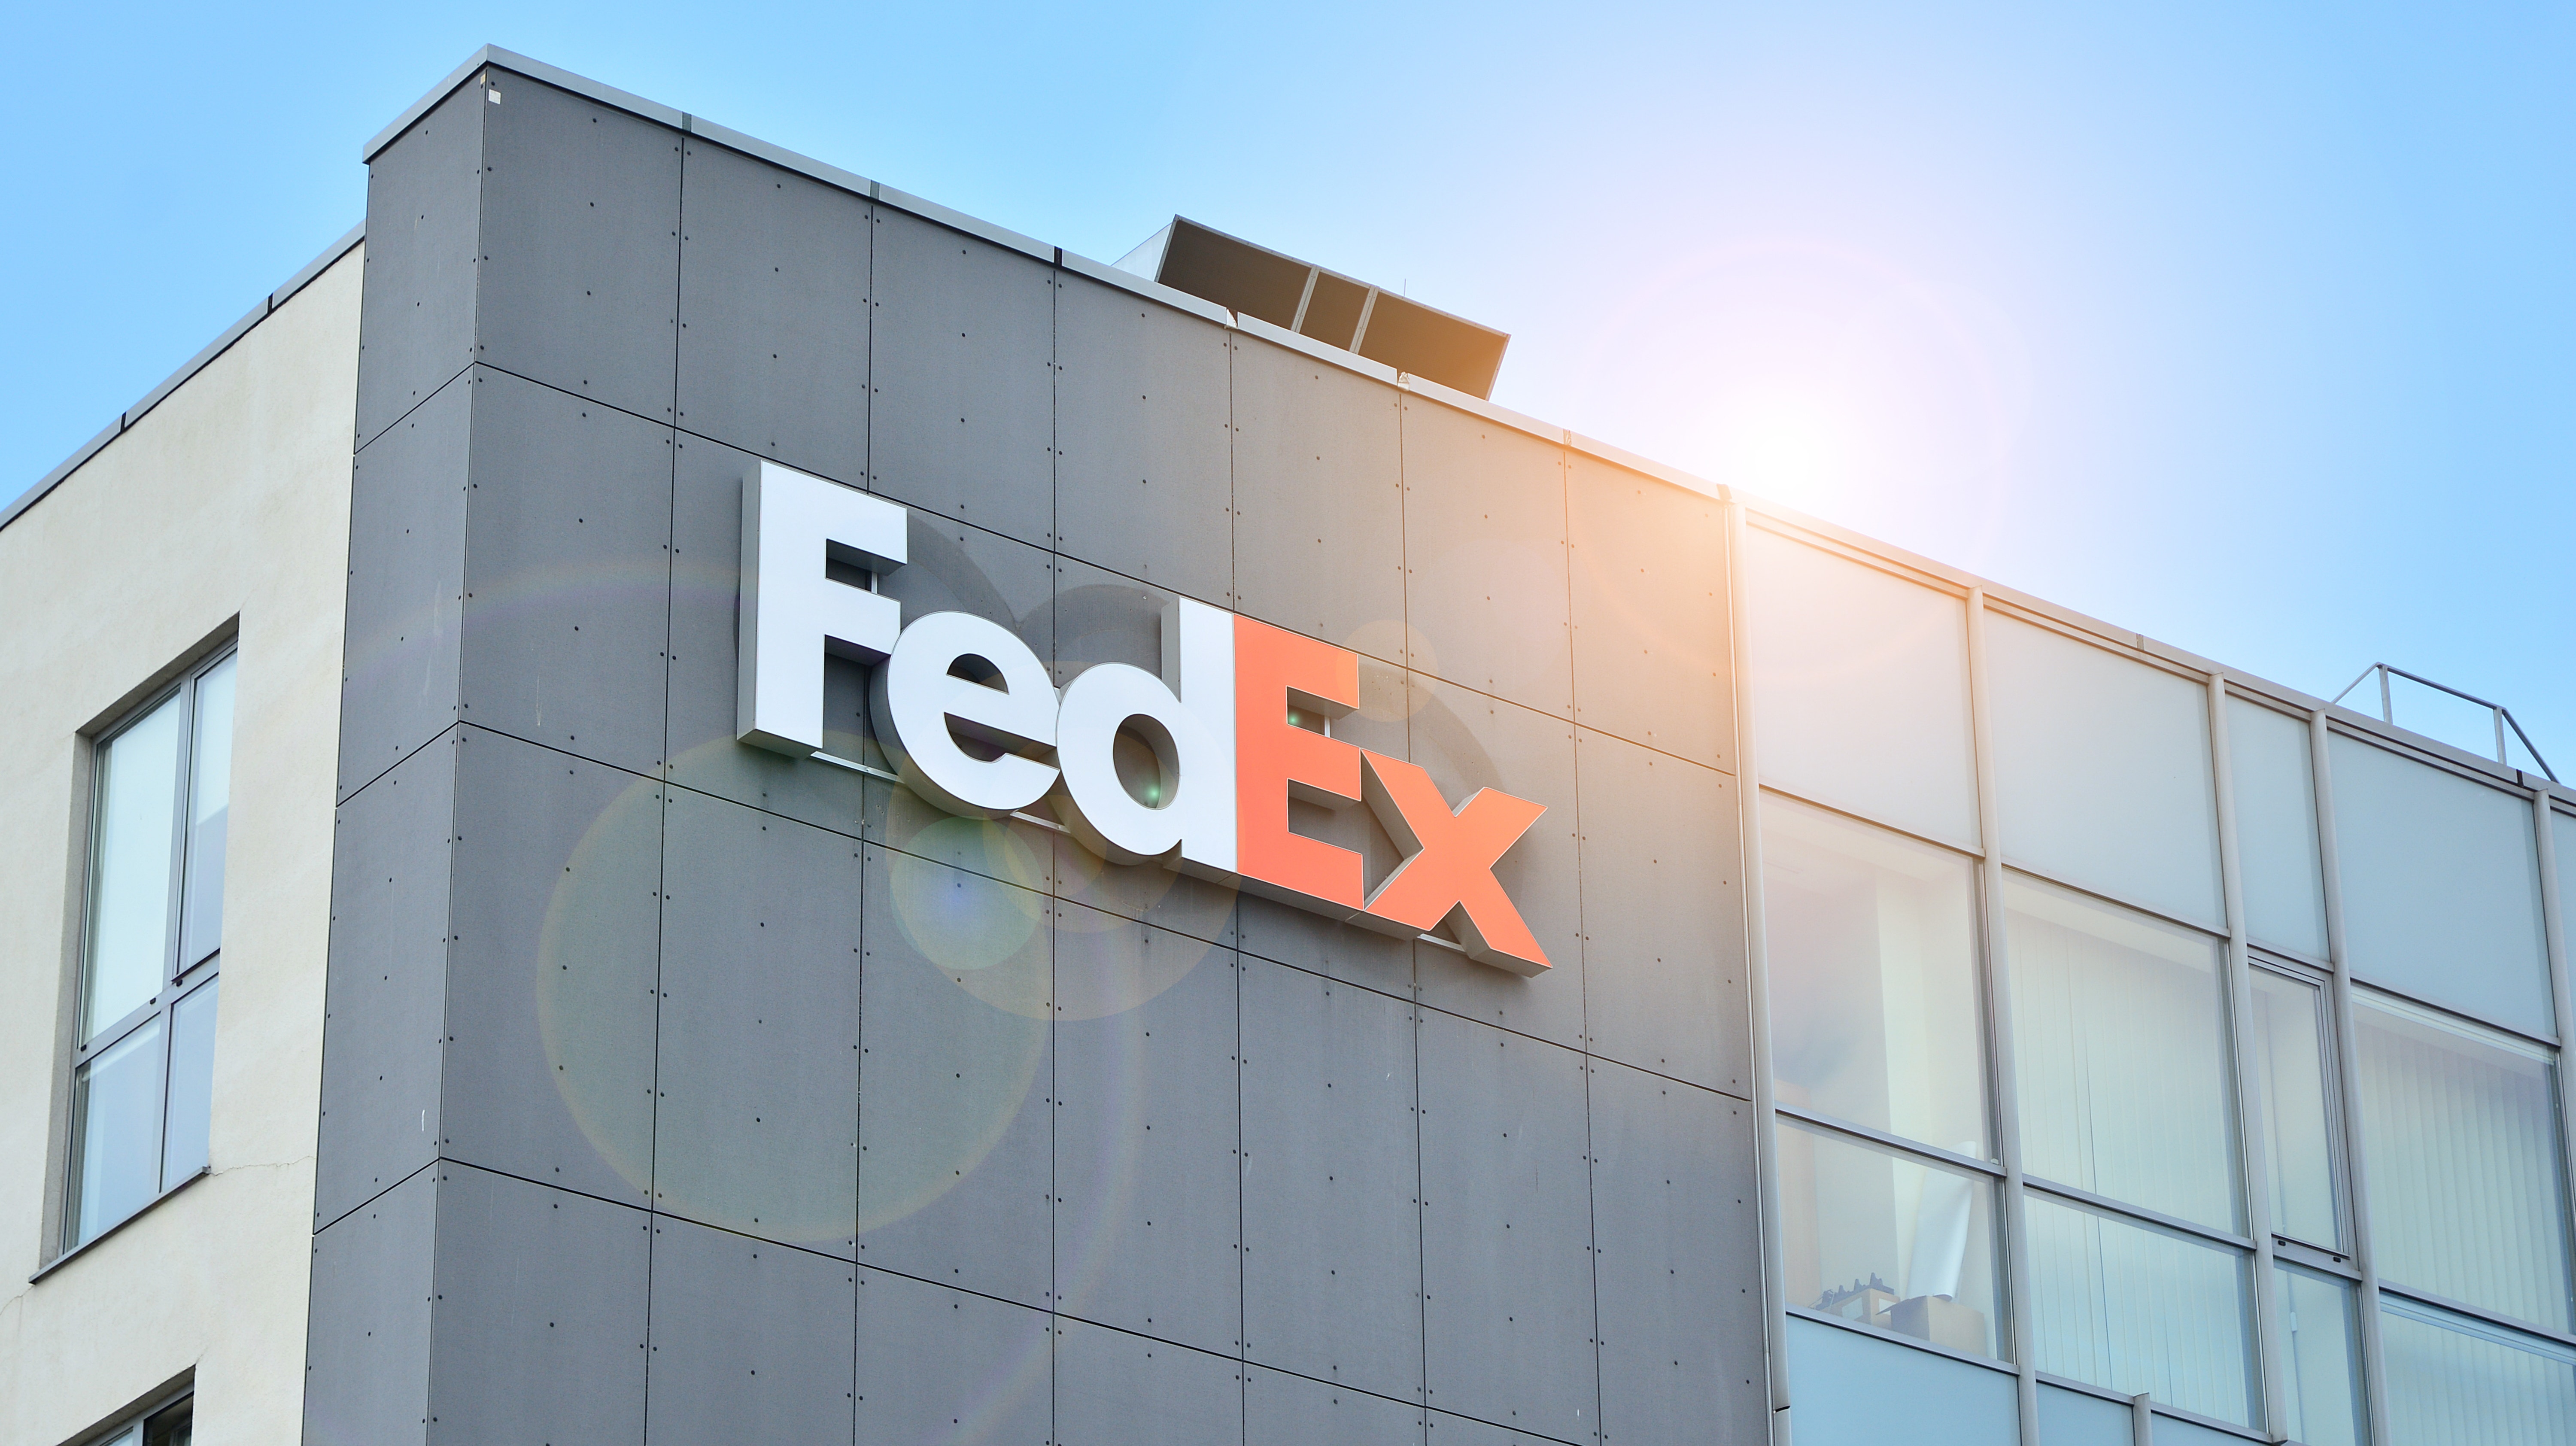 3 FedEx Analysts React To Mixed Q4 Earnings: 'Analyst Day Anticipation Building'